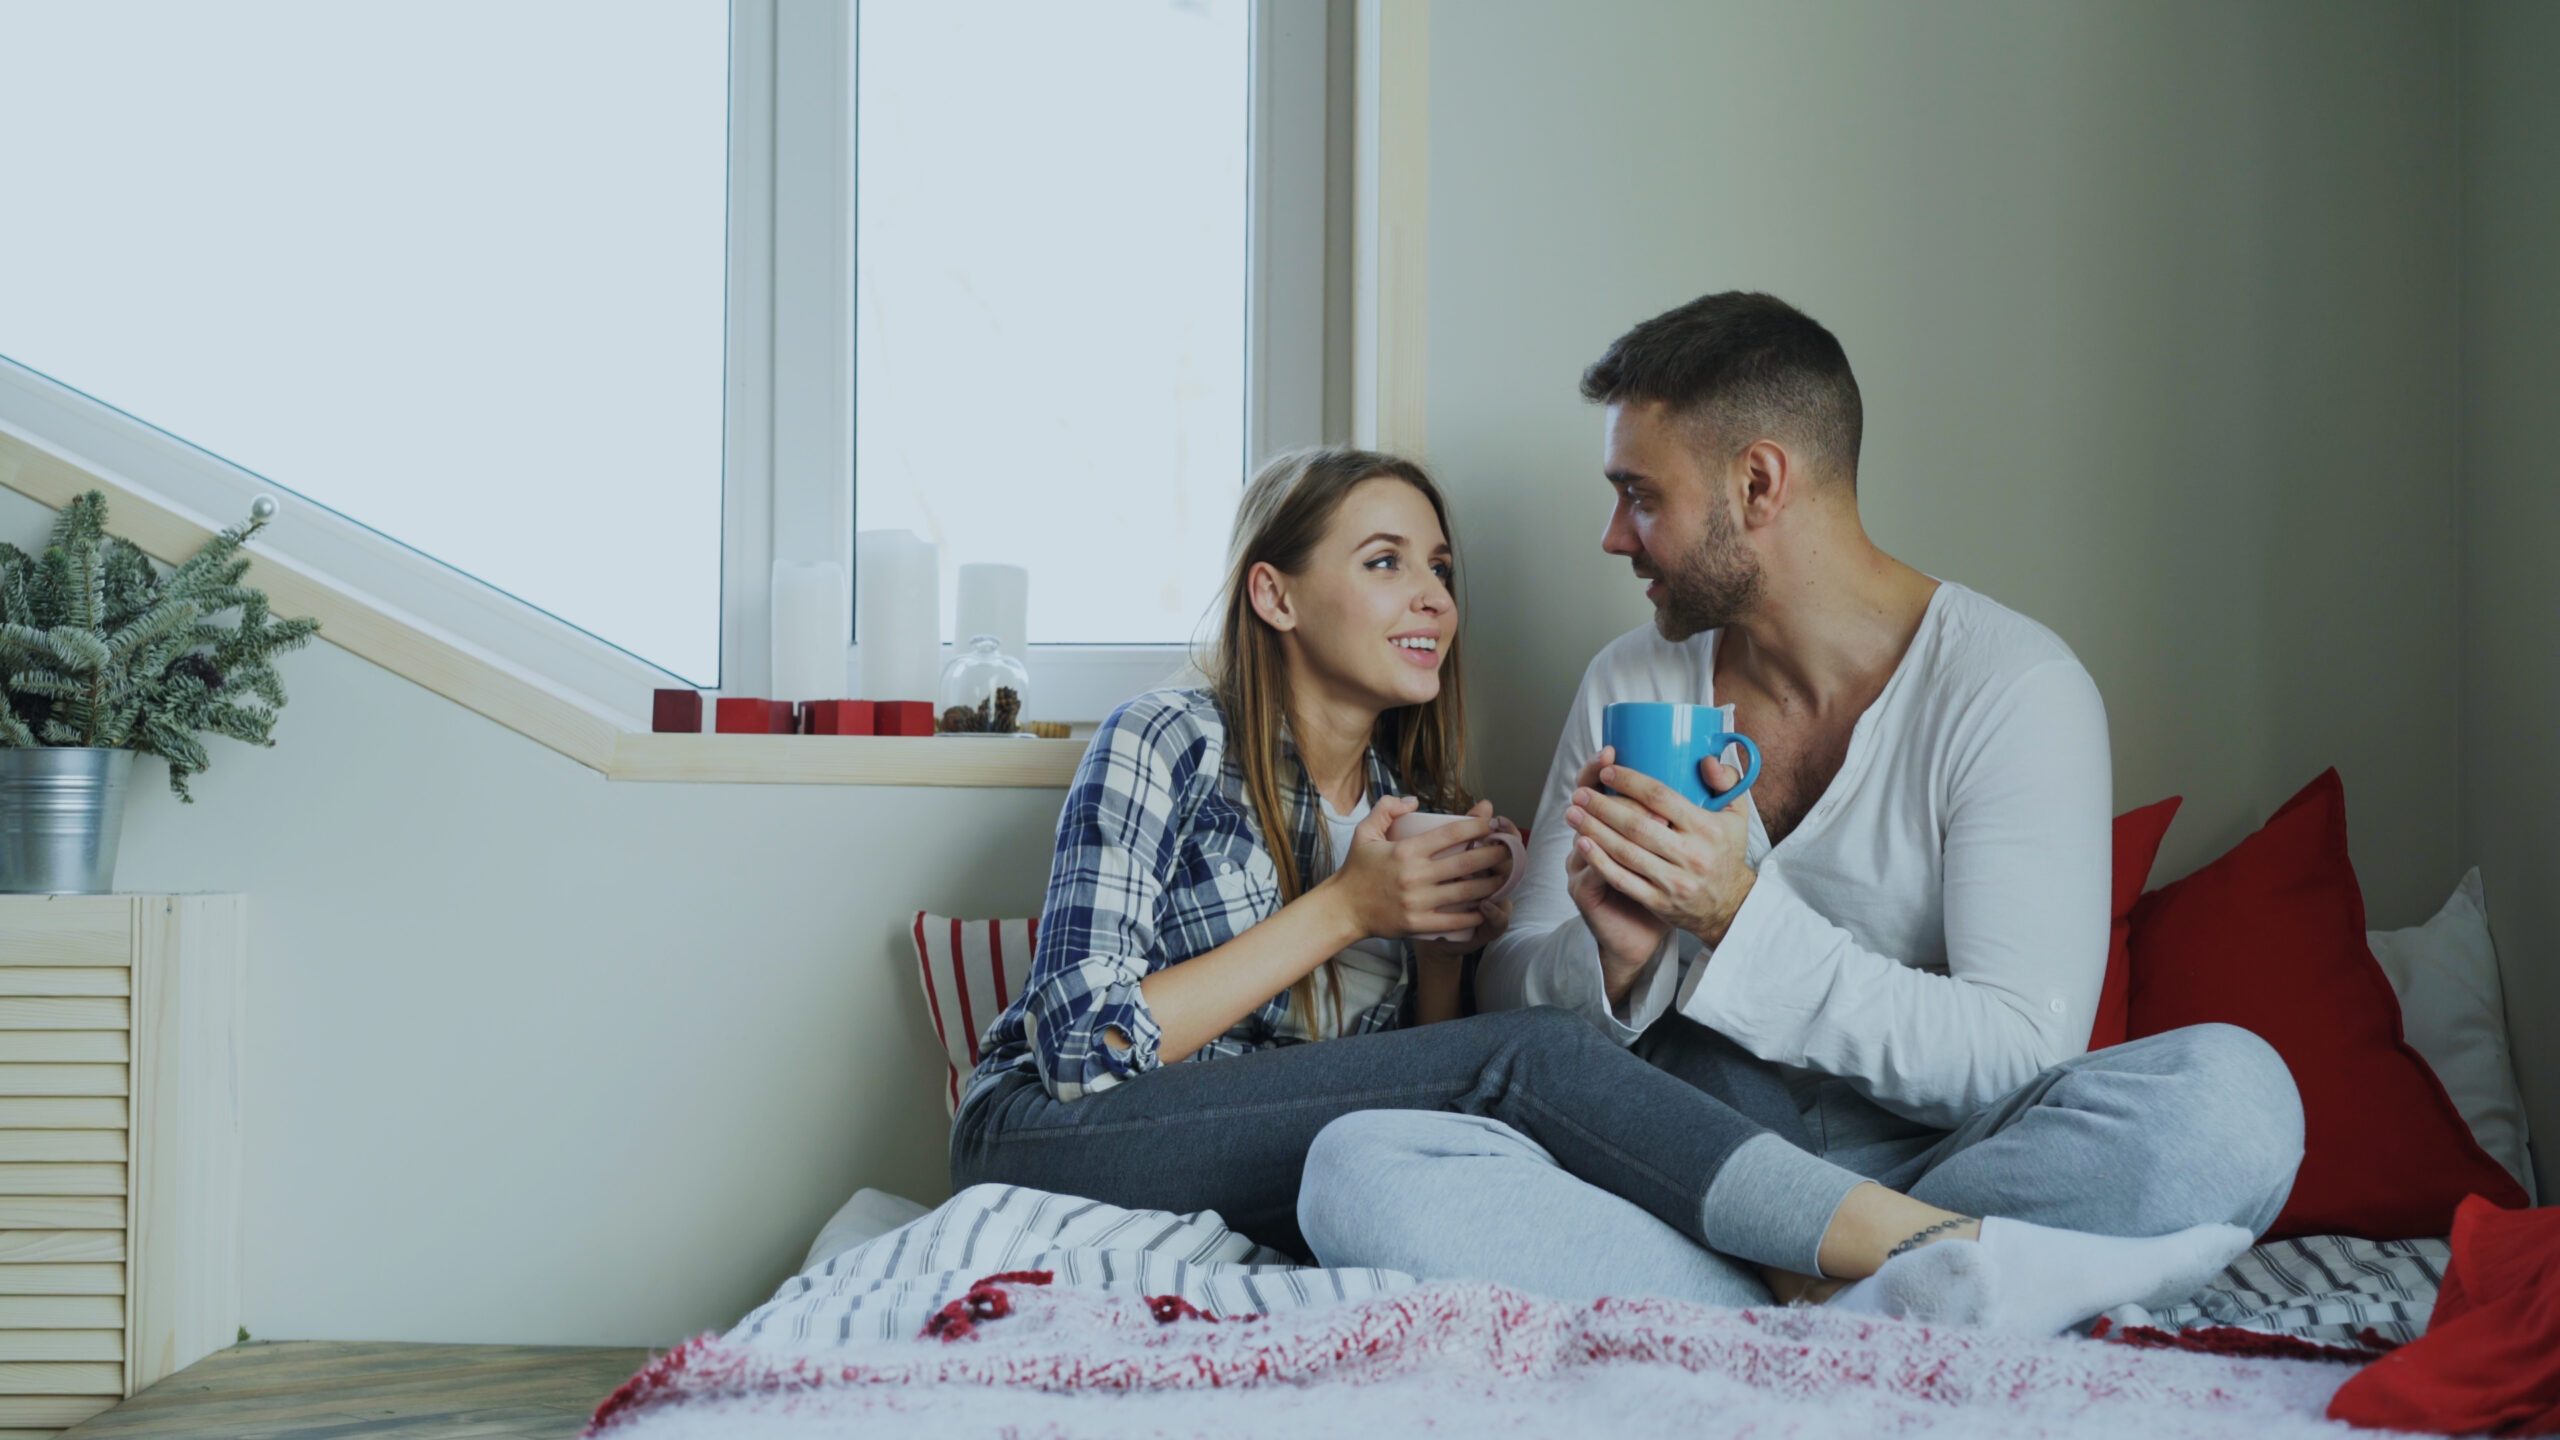 Is Your Sex Life Being Affected By Caffeine?